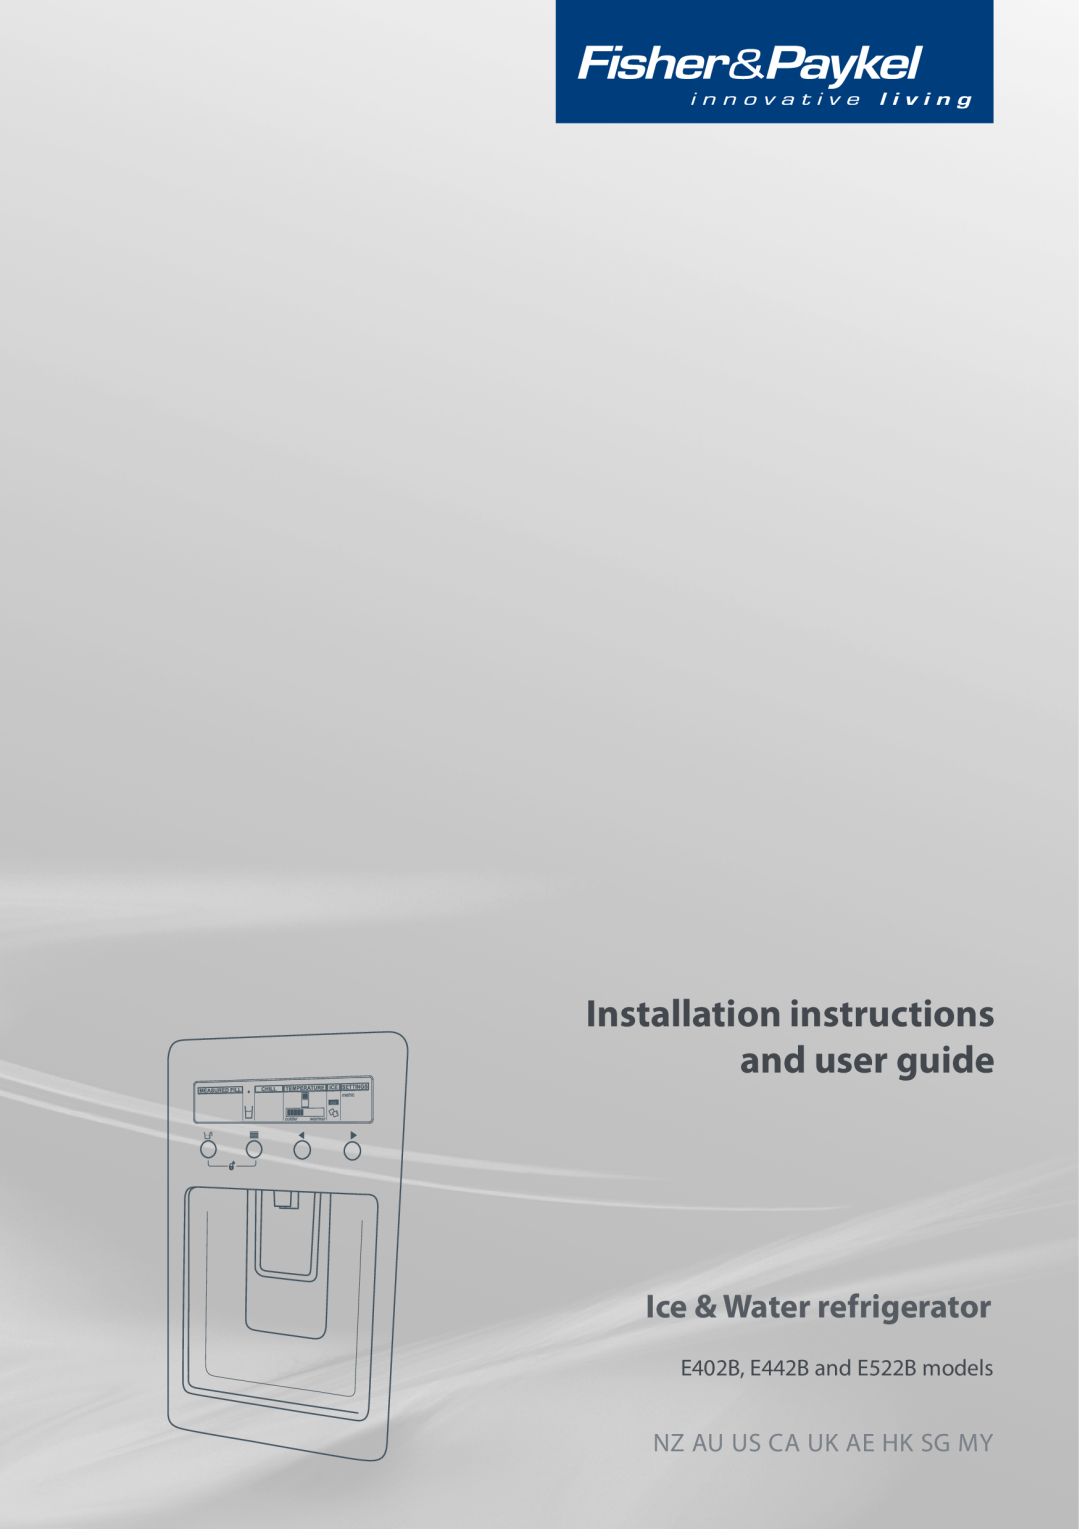 Fisher & Paykel E413T, E440T installation instructions Installation instructions and user guide, Refrigerator & Freezer 